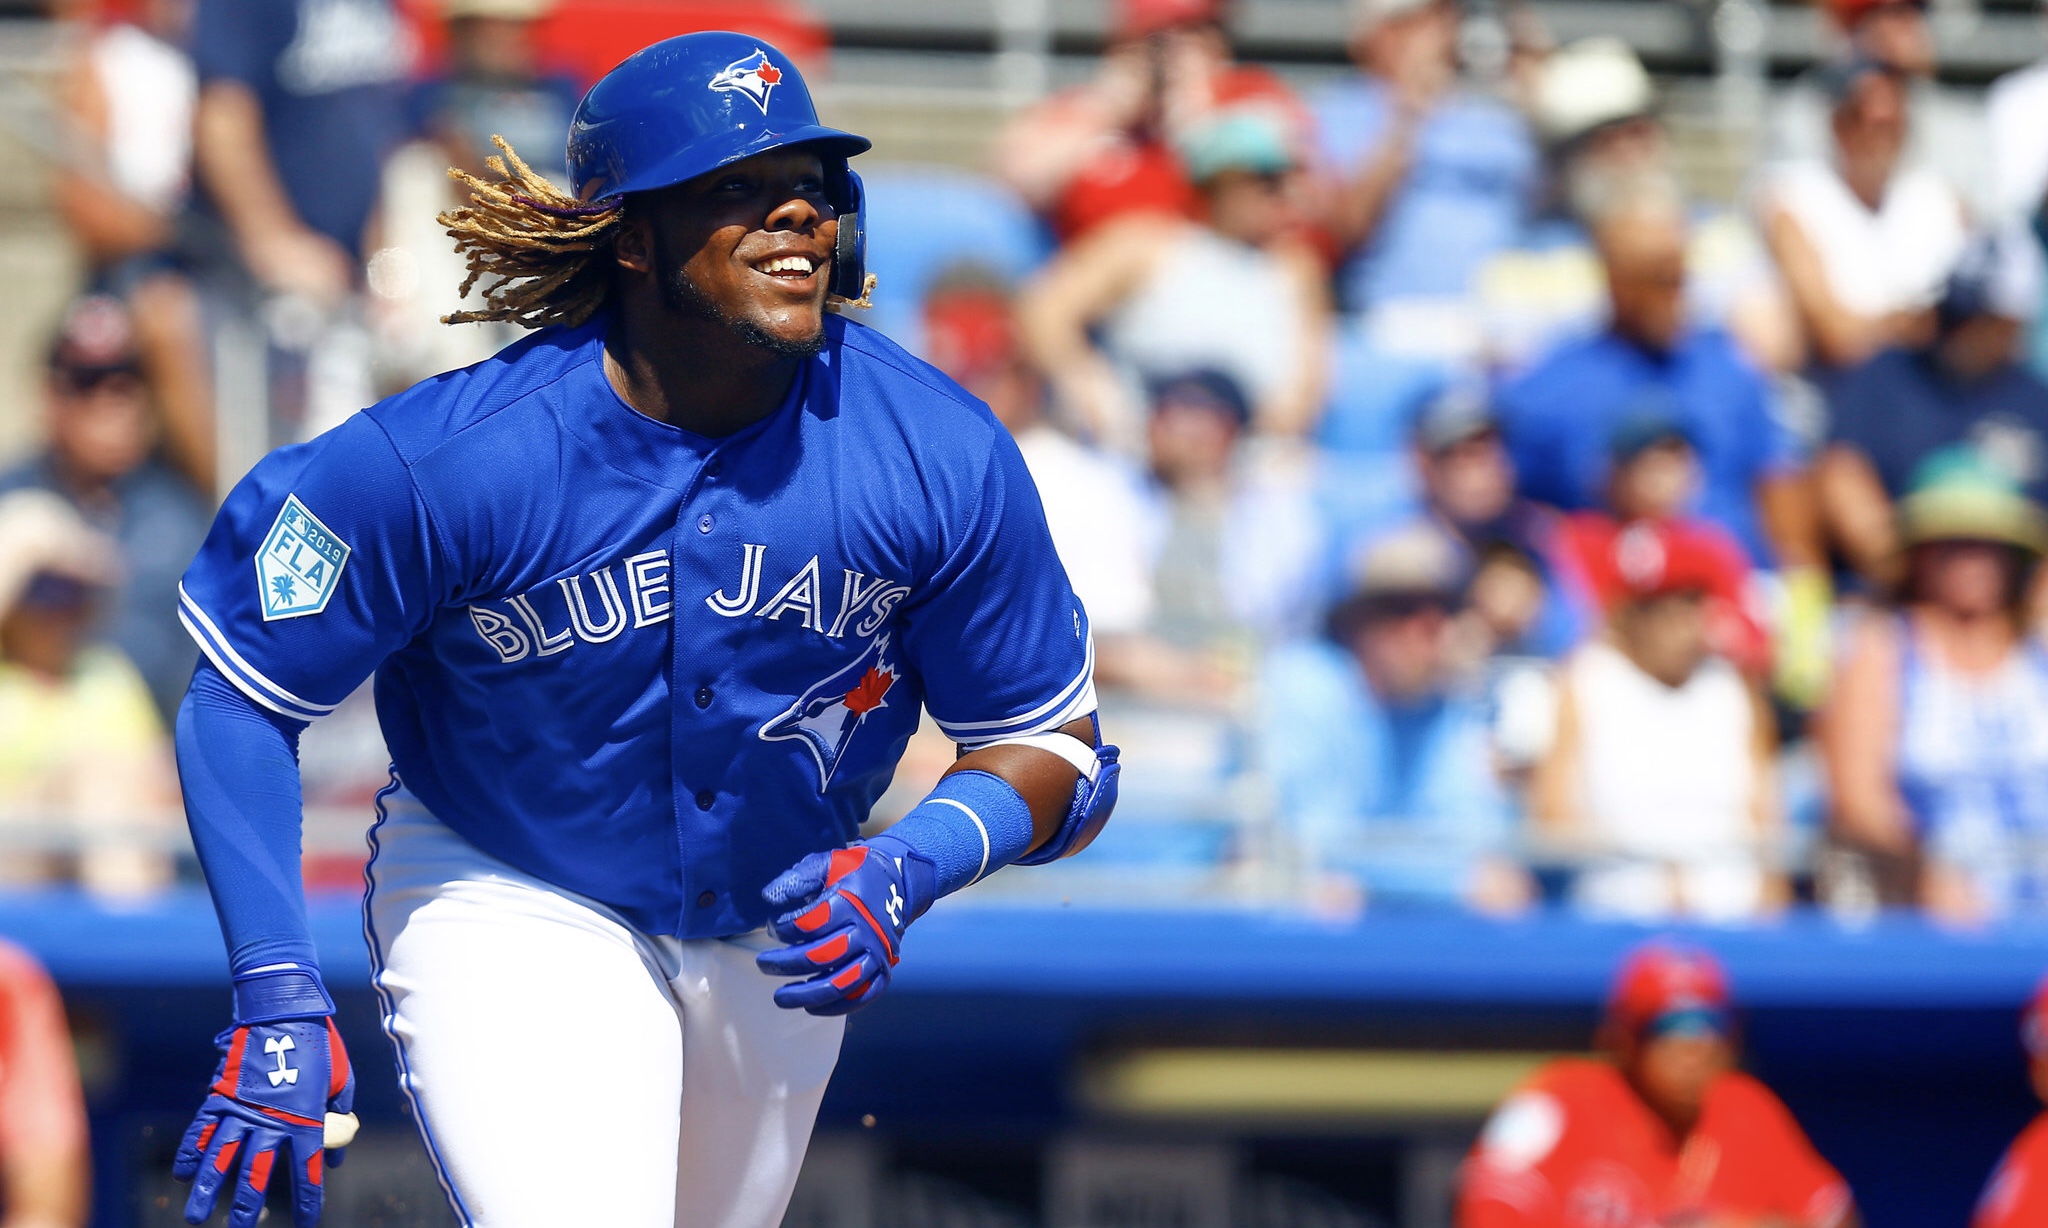 Photo of Blue Jays' outfielder Vladimir Guerrero Jr. exiting the batter’s box